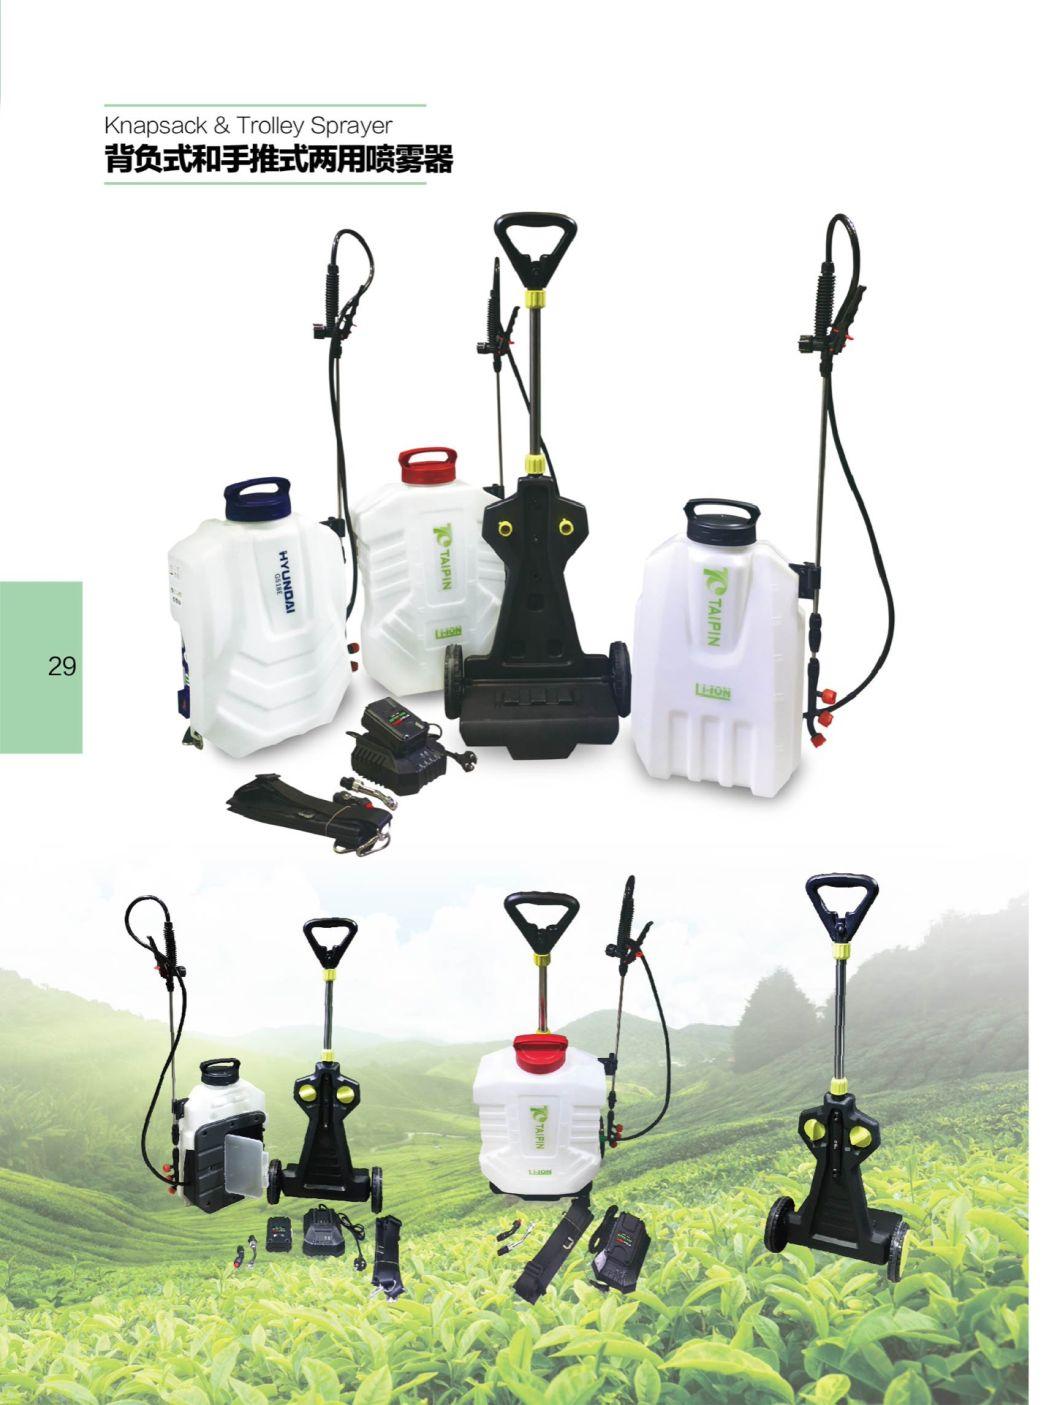 15L Taizhou Agricultural Electric Knapsack Backpack Sprayers Battery Agricultural Sprayer